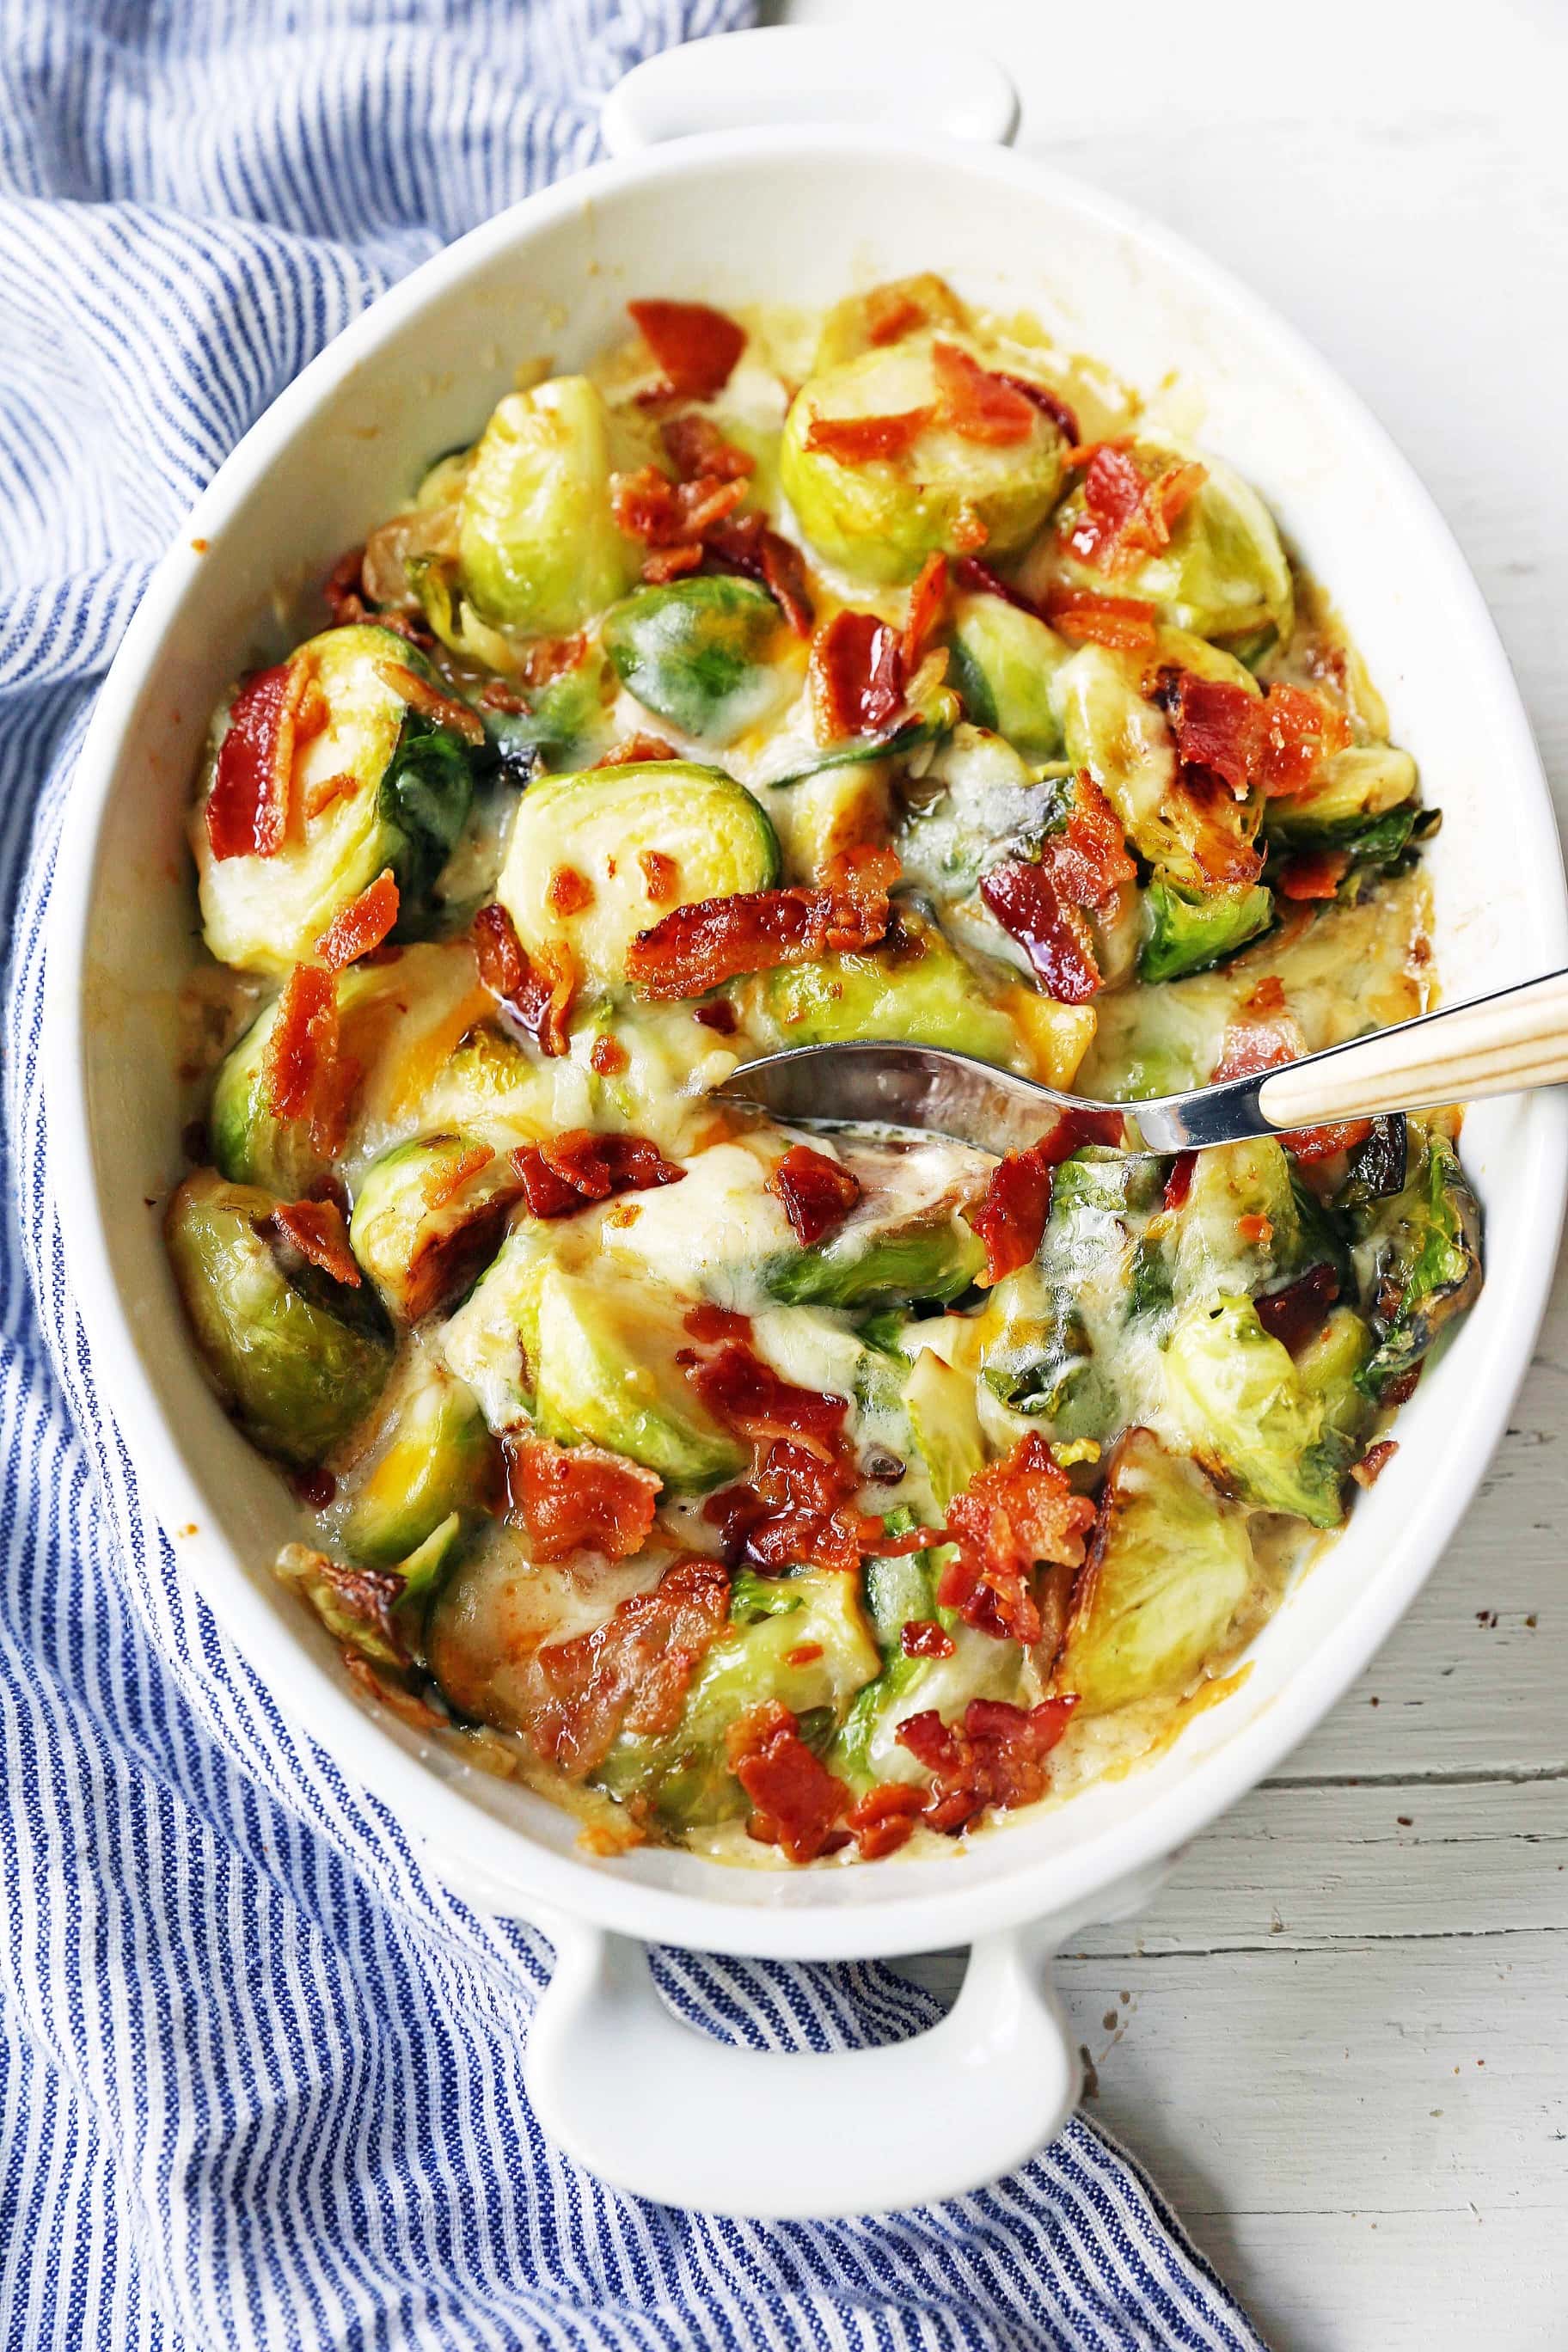 Creamy Cheesy Brussels Sprouts with Bacon. Roasted brussels sprouts with crispy bacon, a creamy sauce, and melted cheese. www.modernhoney.com #brusselsprouts #brusselsprouts #sidedish #vegetables 